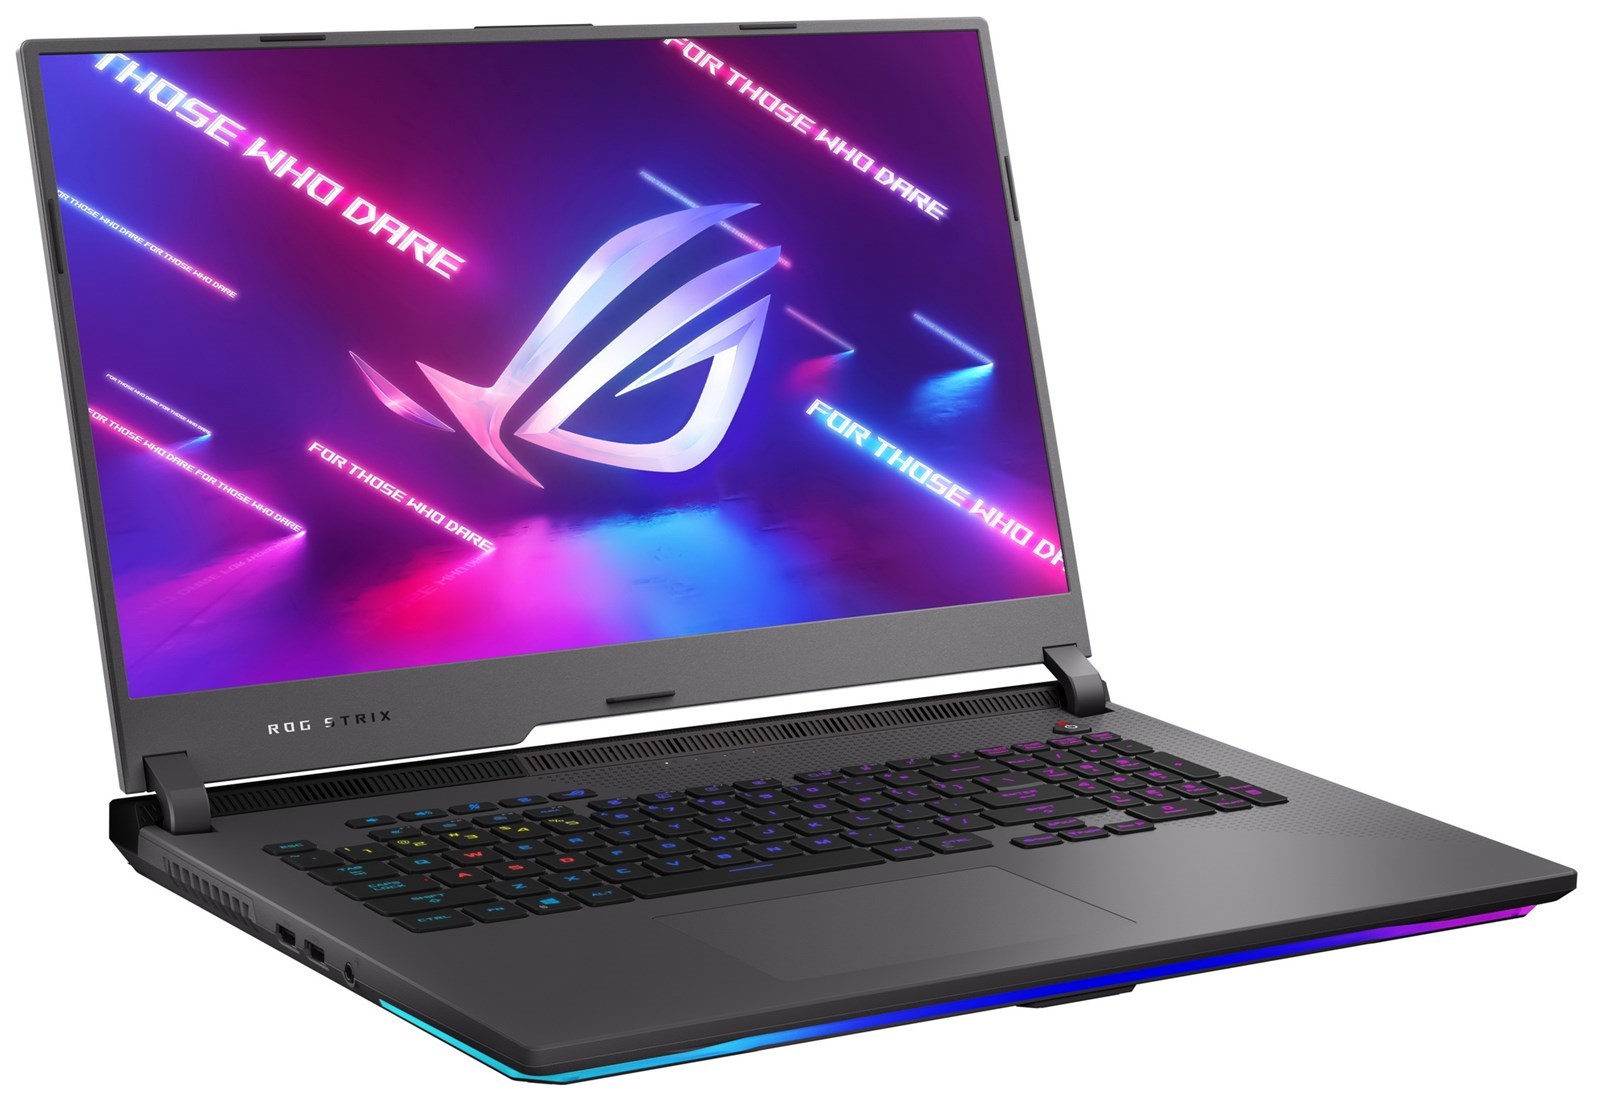 Pre-orders for Asus ROG Strix G17 with GeForce RTX 3060 and Ryzen 7 5800H are now available at $ 1499